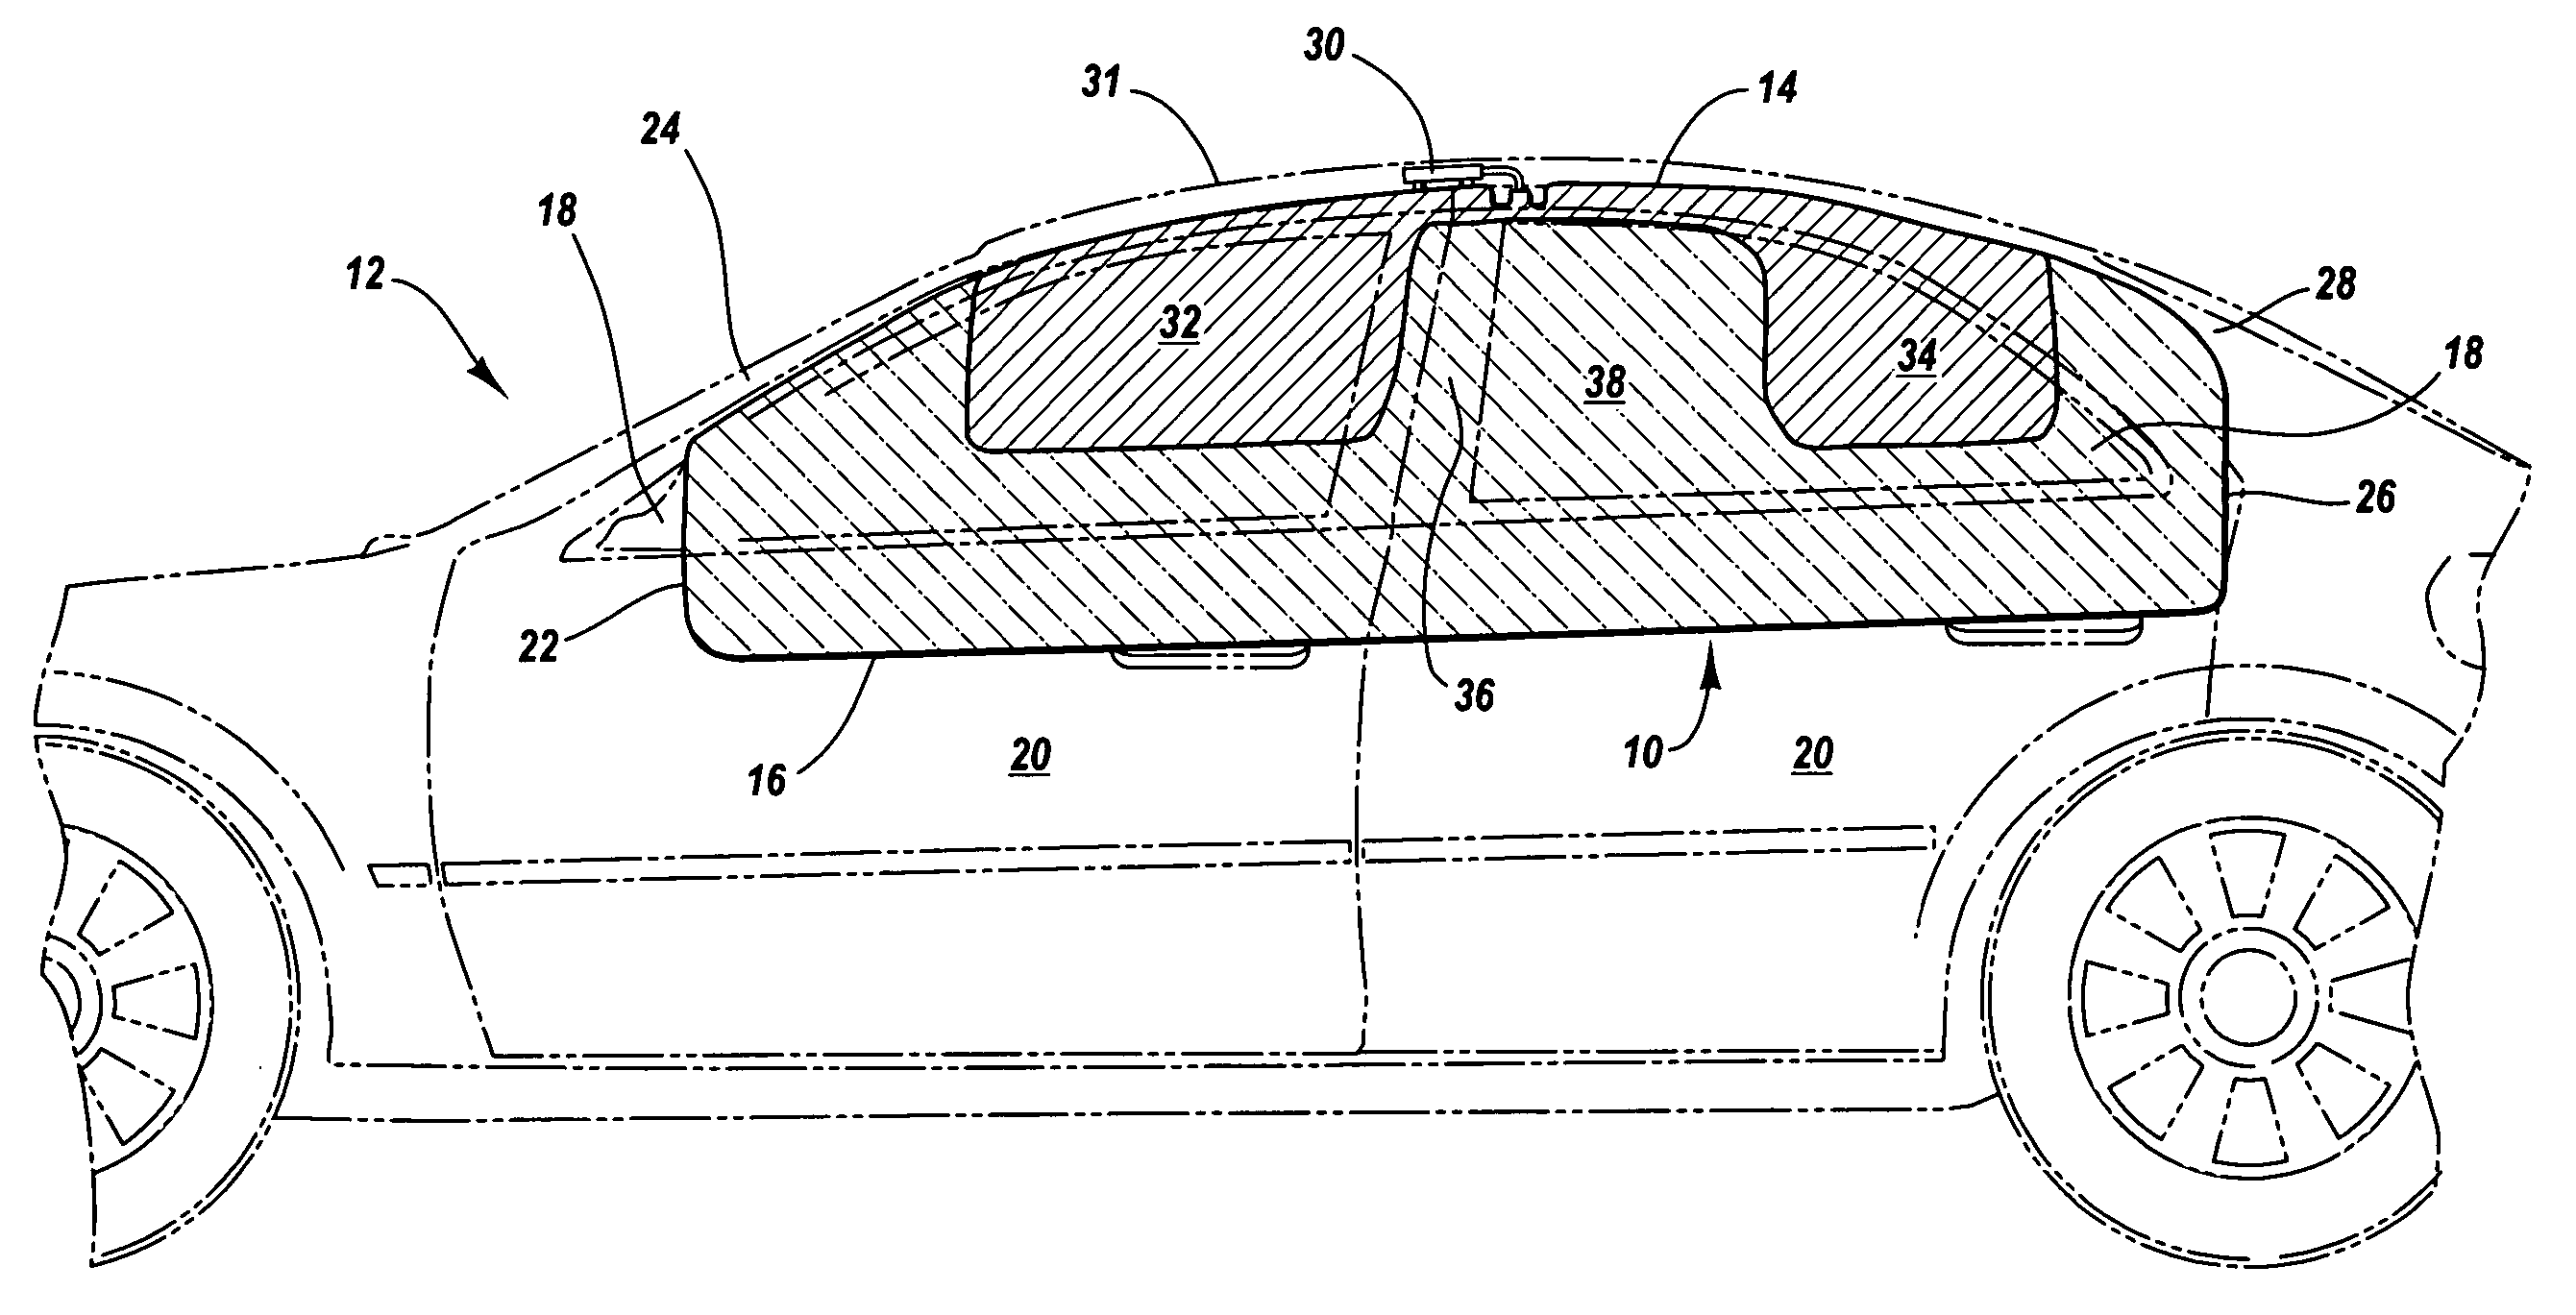 Expanding net integral with an inflatable airbag curtain